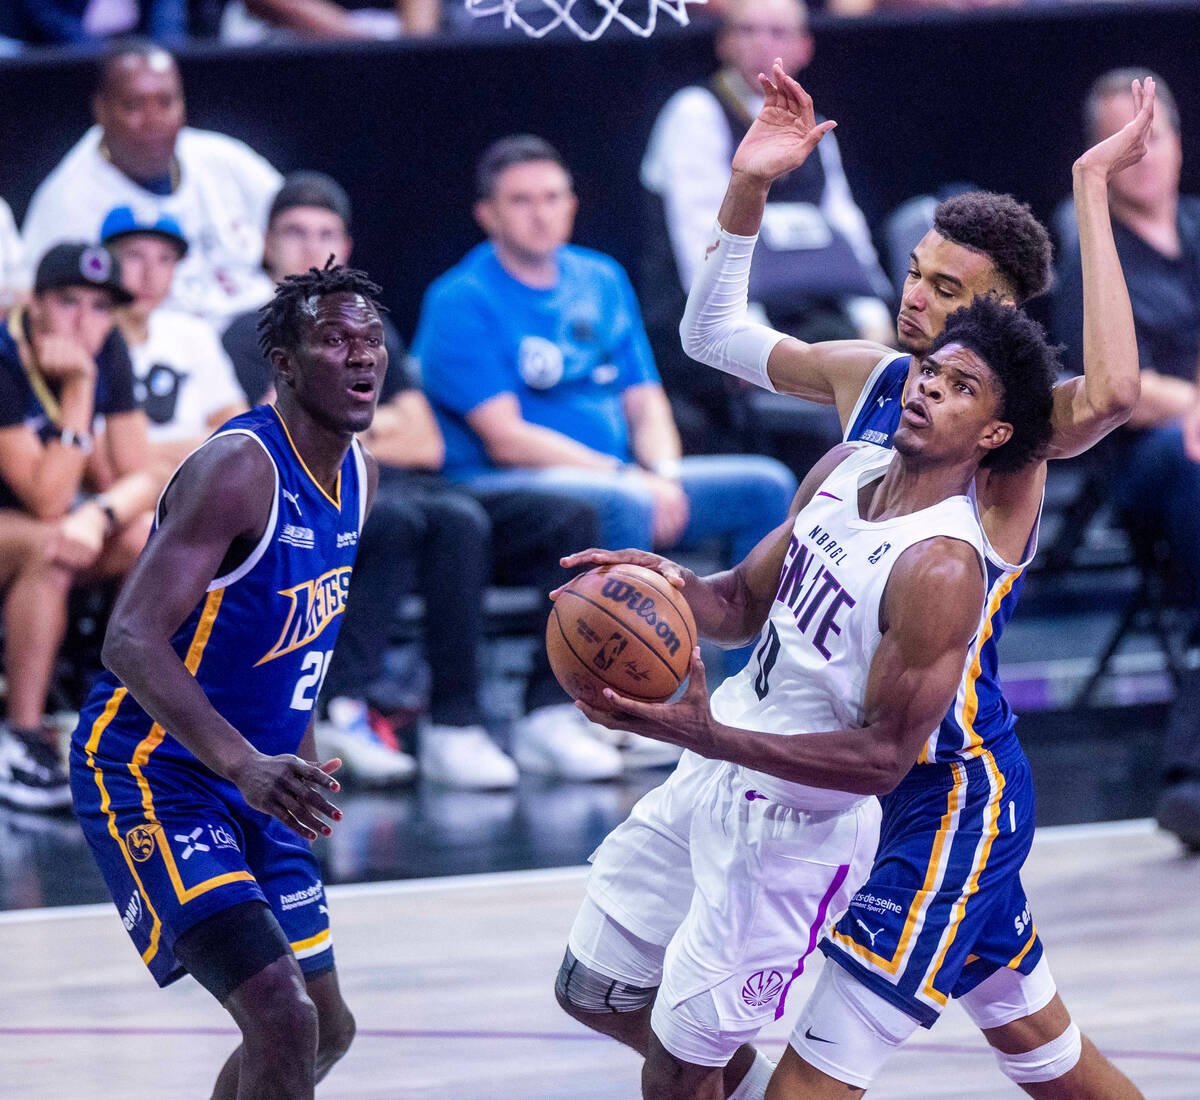 NBA draft prospects star in G League exhibition, Basketball